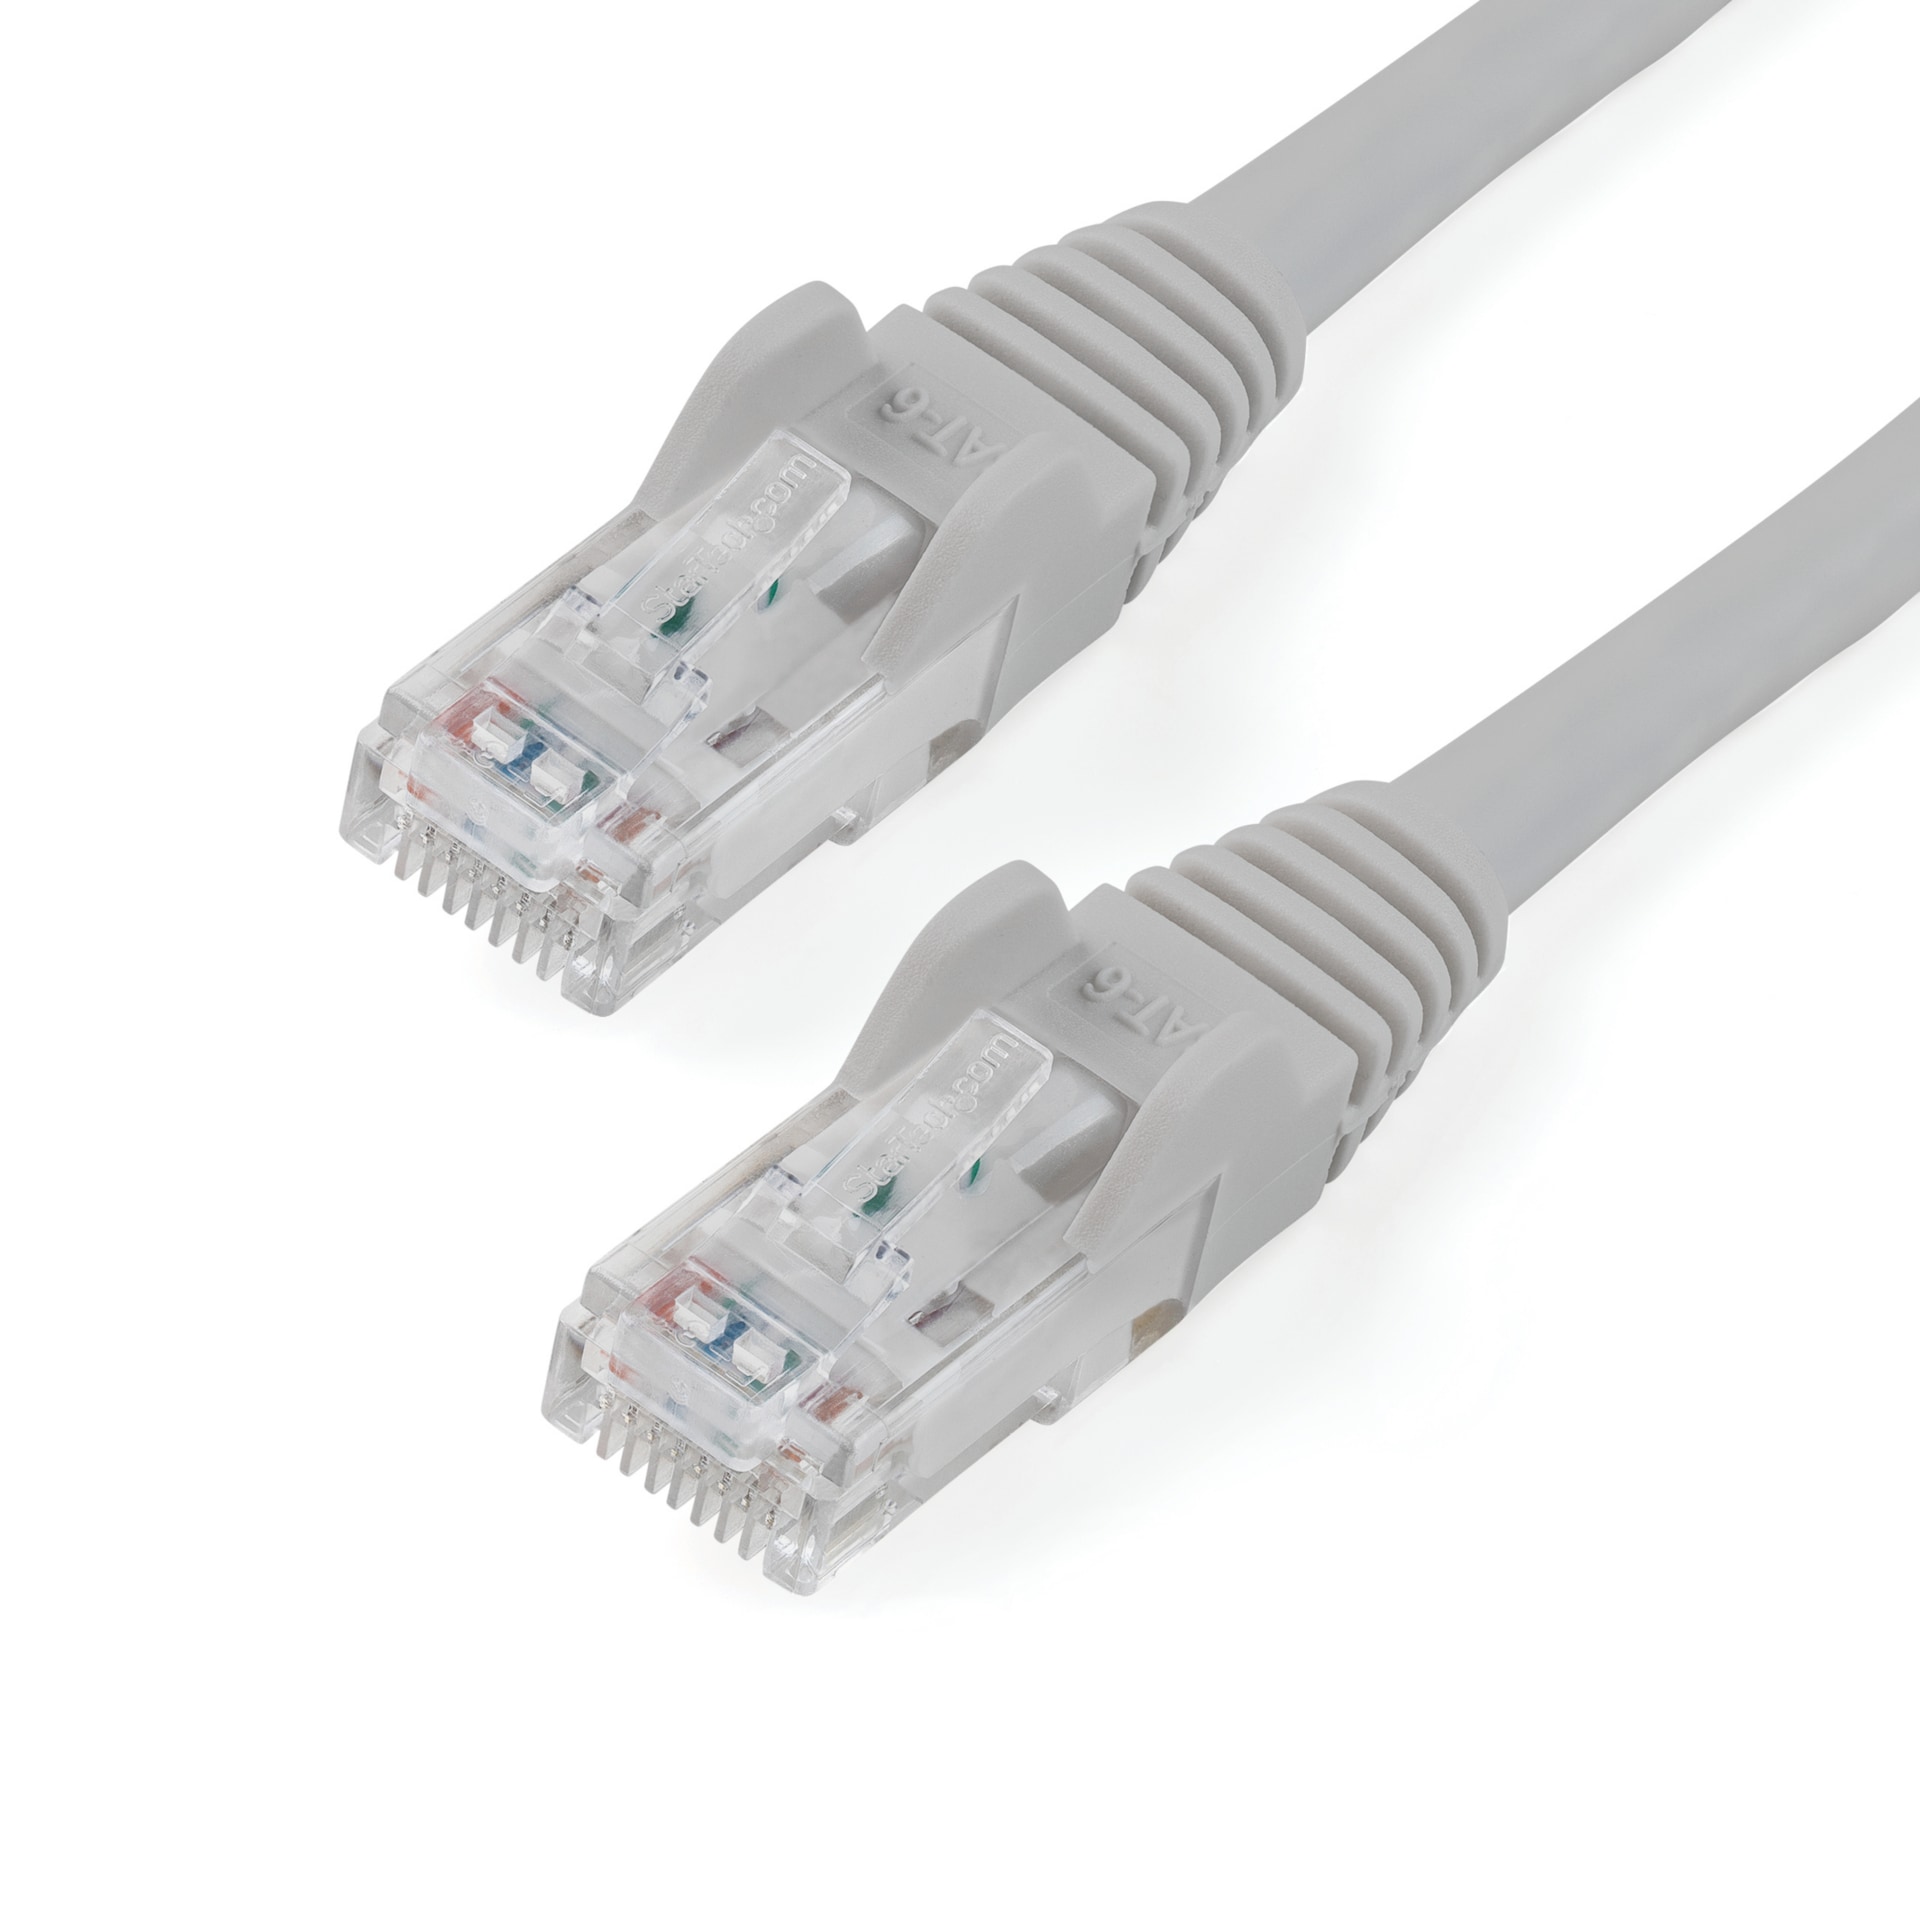 StarTech.com 75ft CAT6 Ethernet Cable Gray Snagless UTP CAT 6 Gigabit Cord/Wire 100W PoE 650MHz